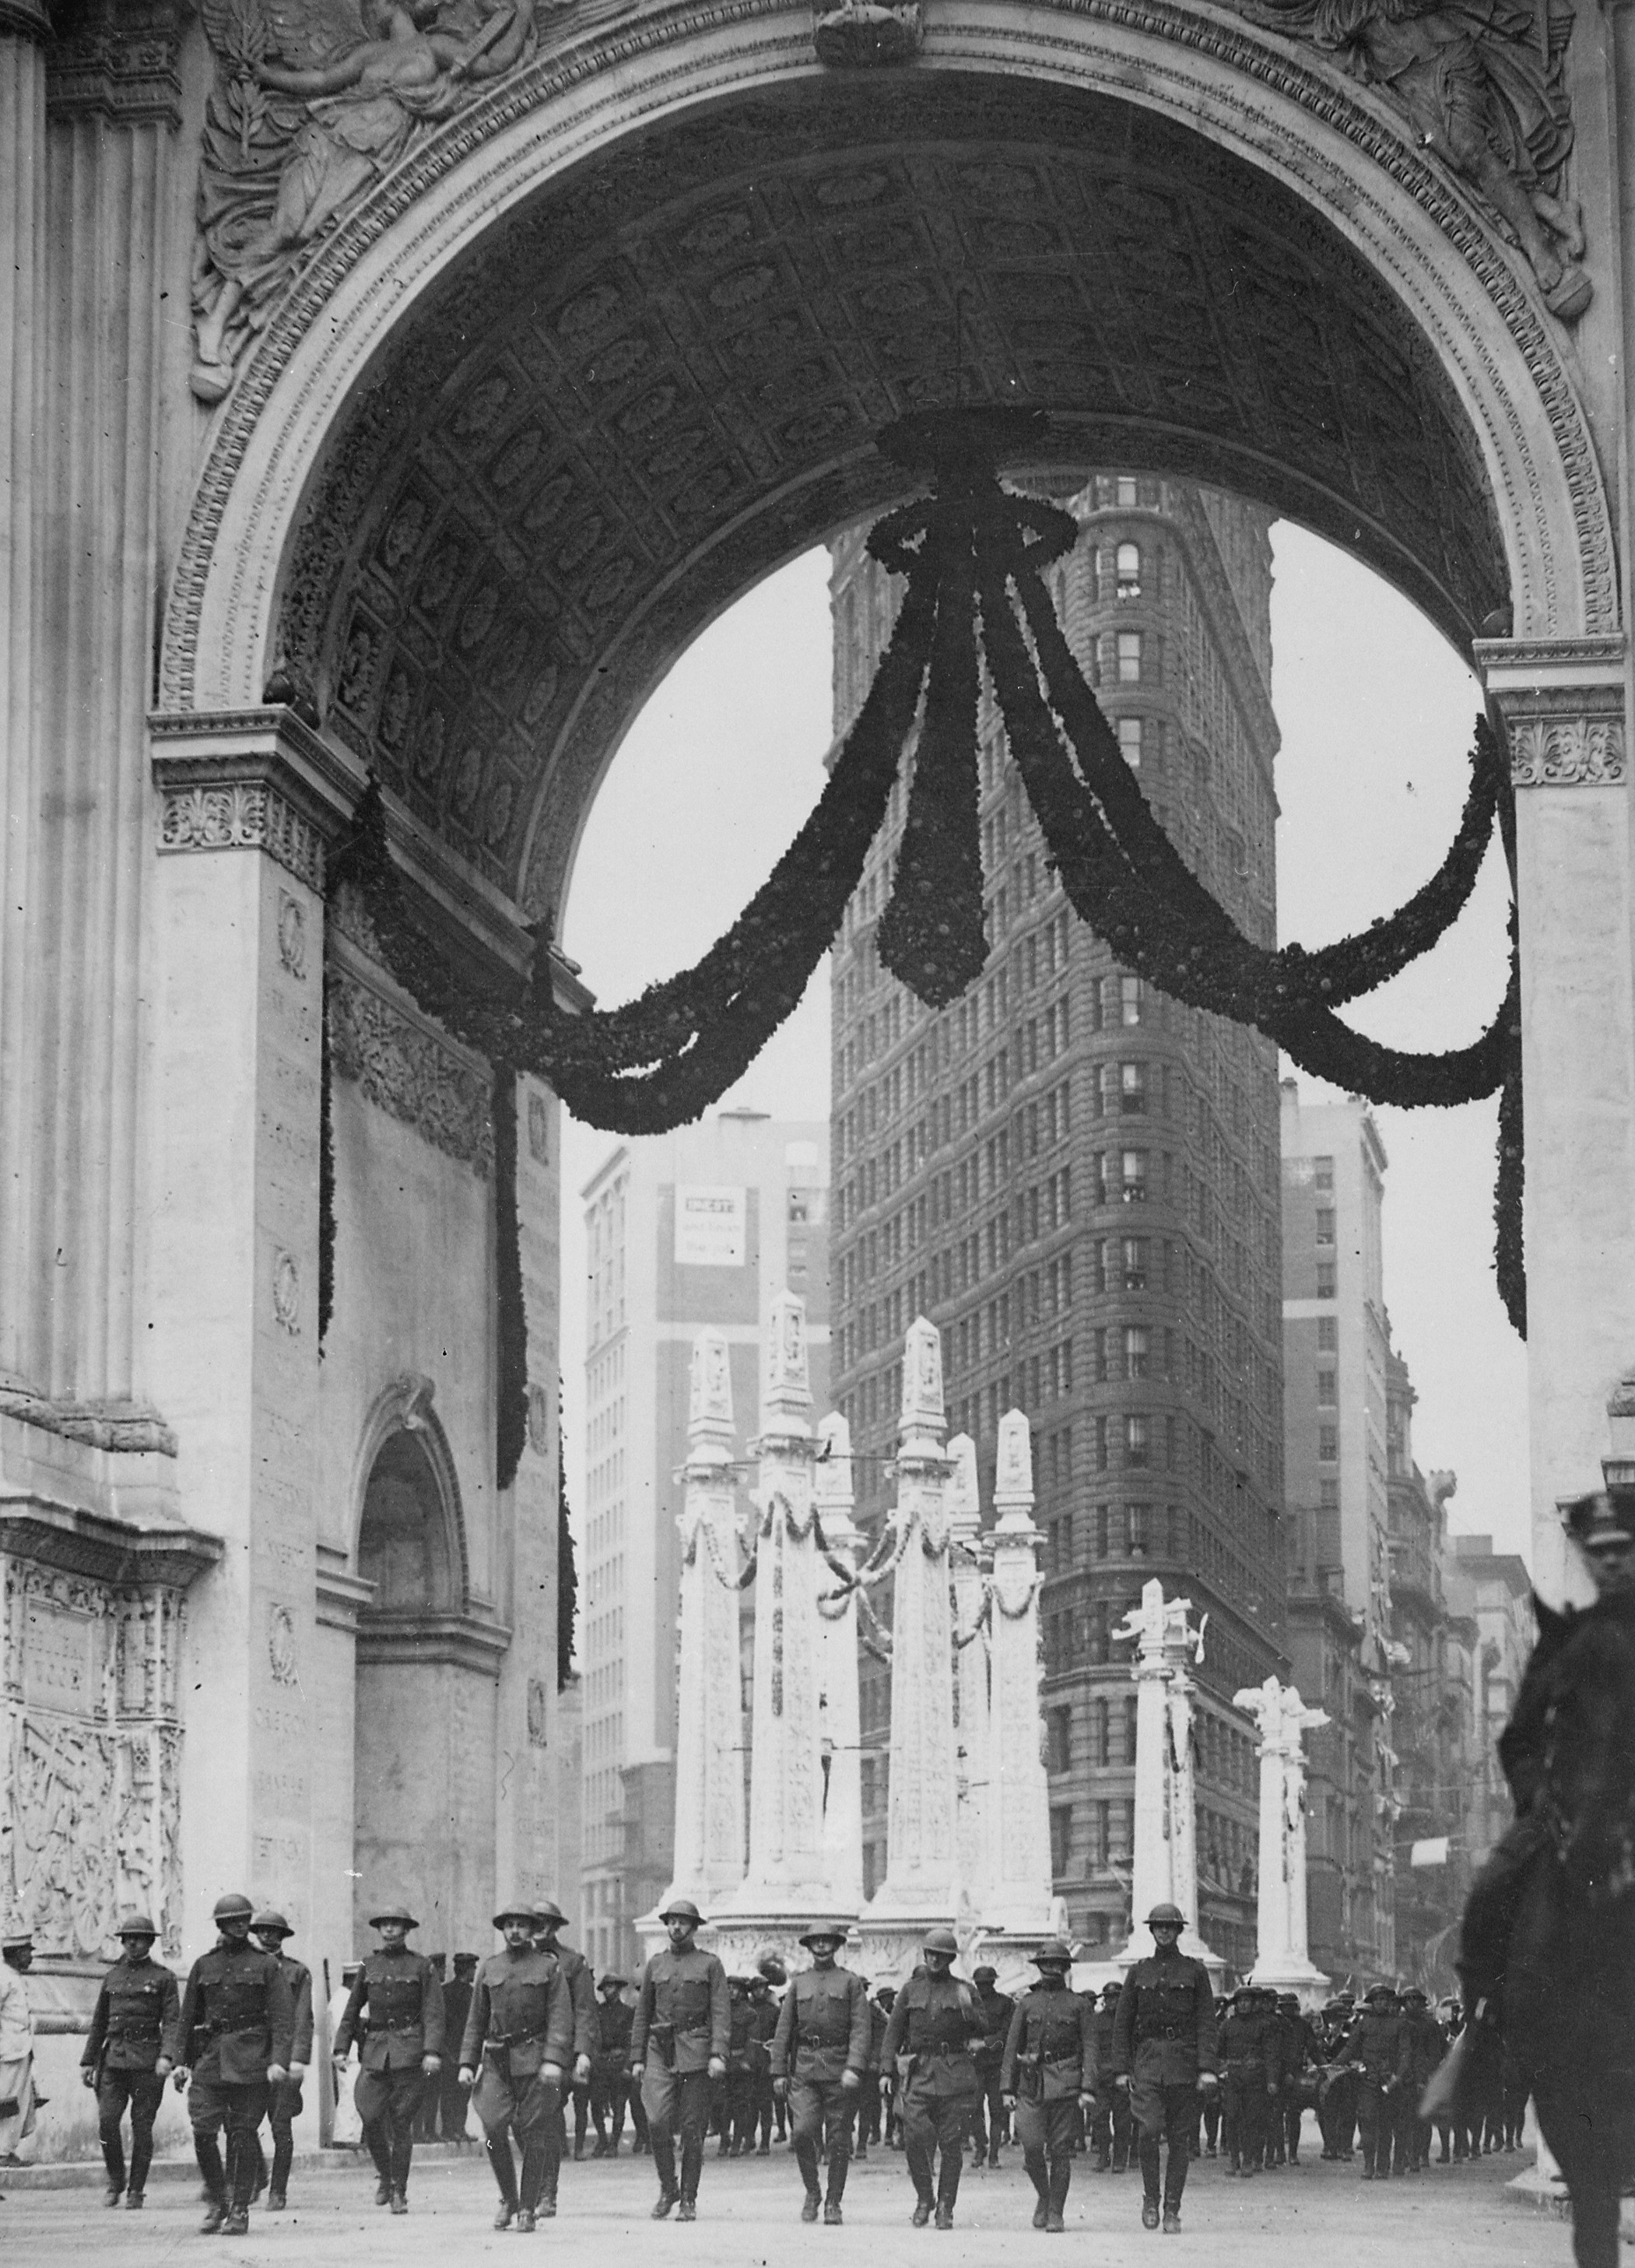 Colonel William Donovan and the staff of 165th Infantry Regiment passing under the Victory Arch, New York, New York, United States, 1919